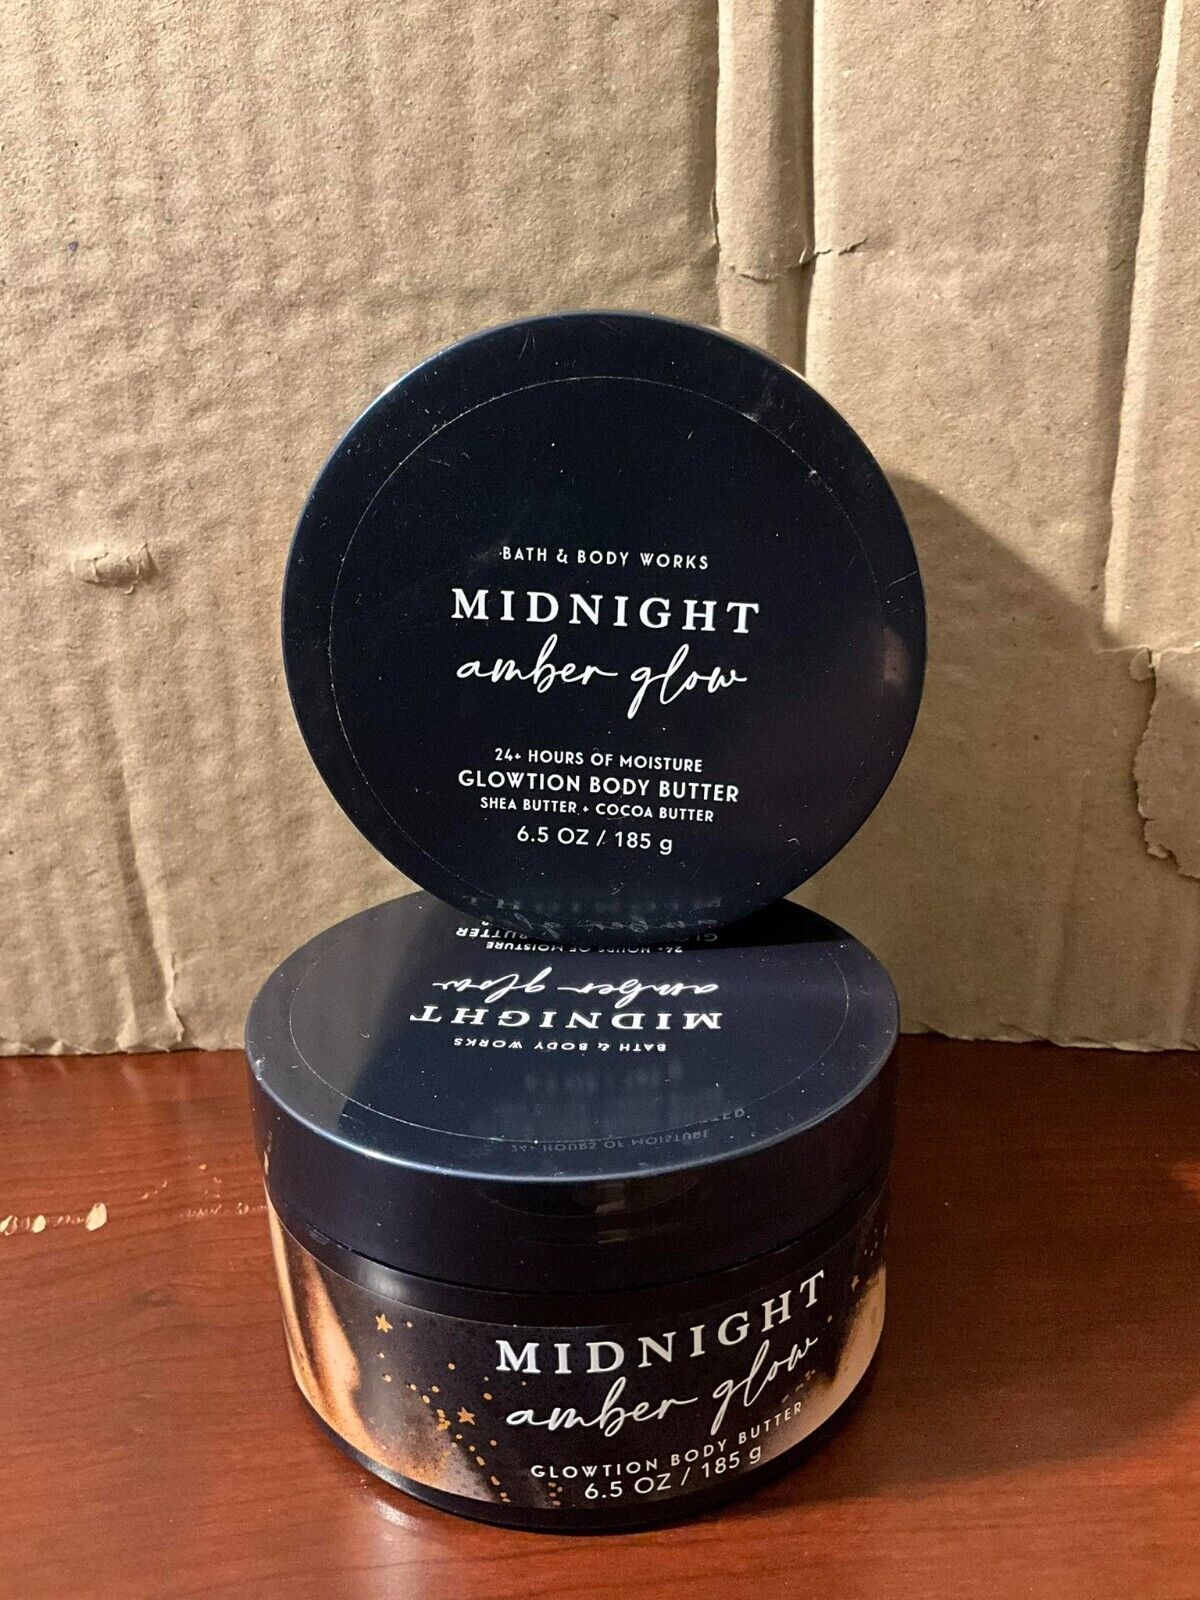  Midnight Amber Glow Glowtion Body Butter With Shea Butter +  Cocoa Butter - 6.5 oz / 185 g : Beauty & Personal Care